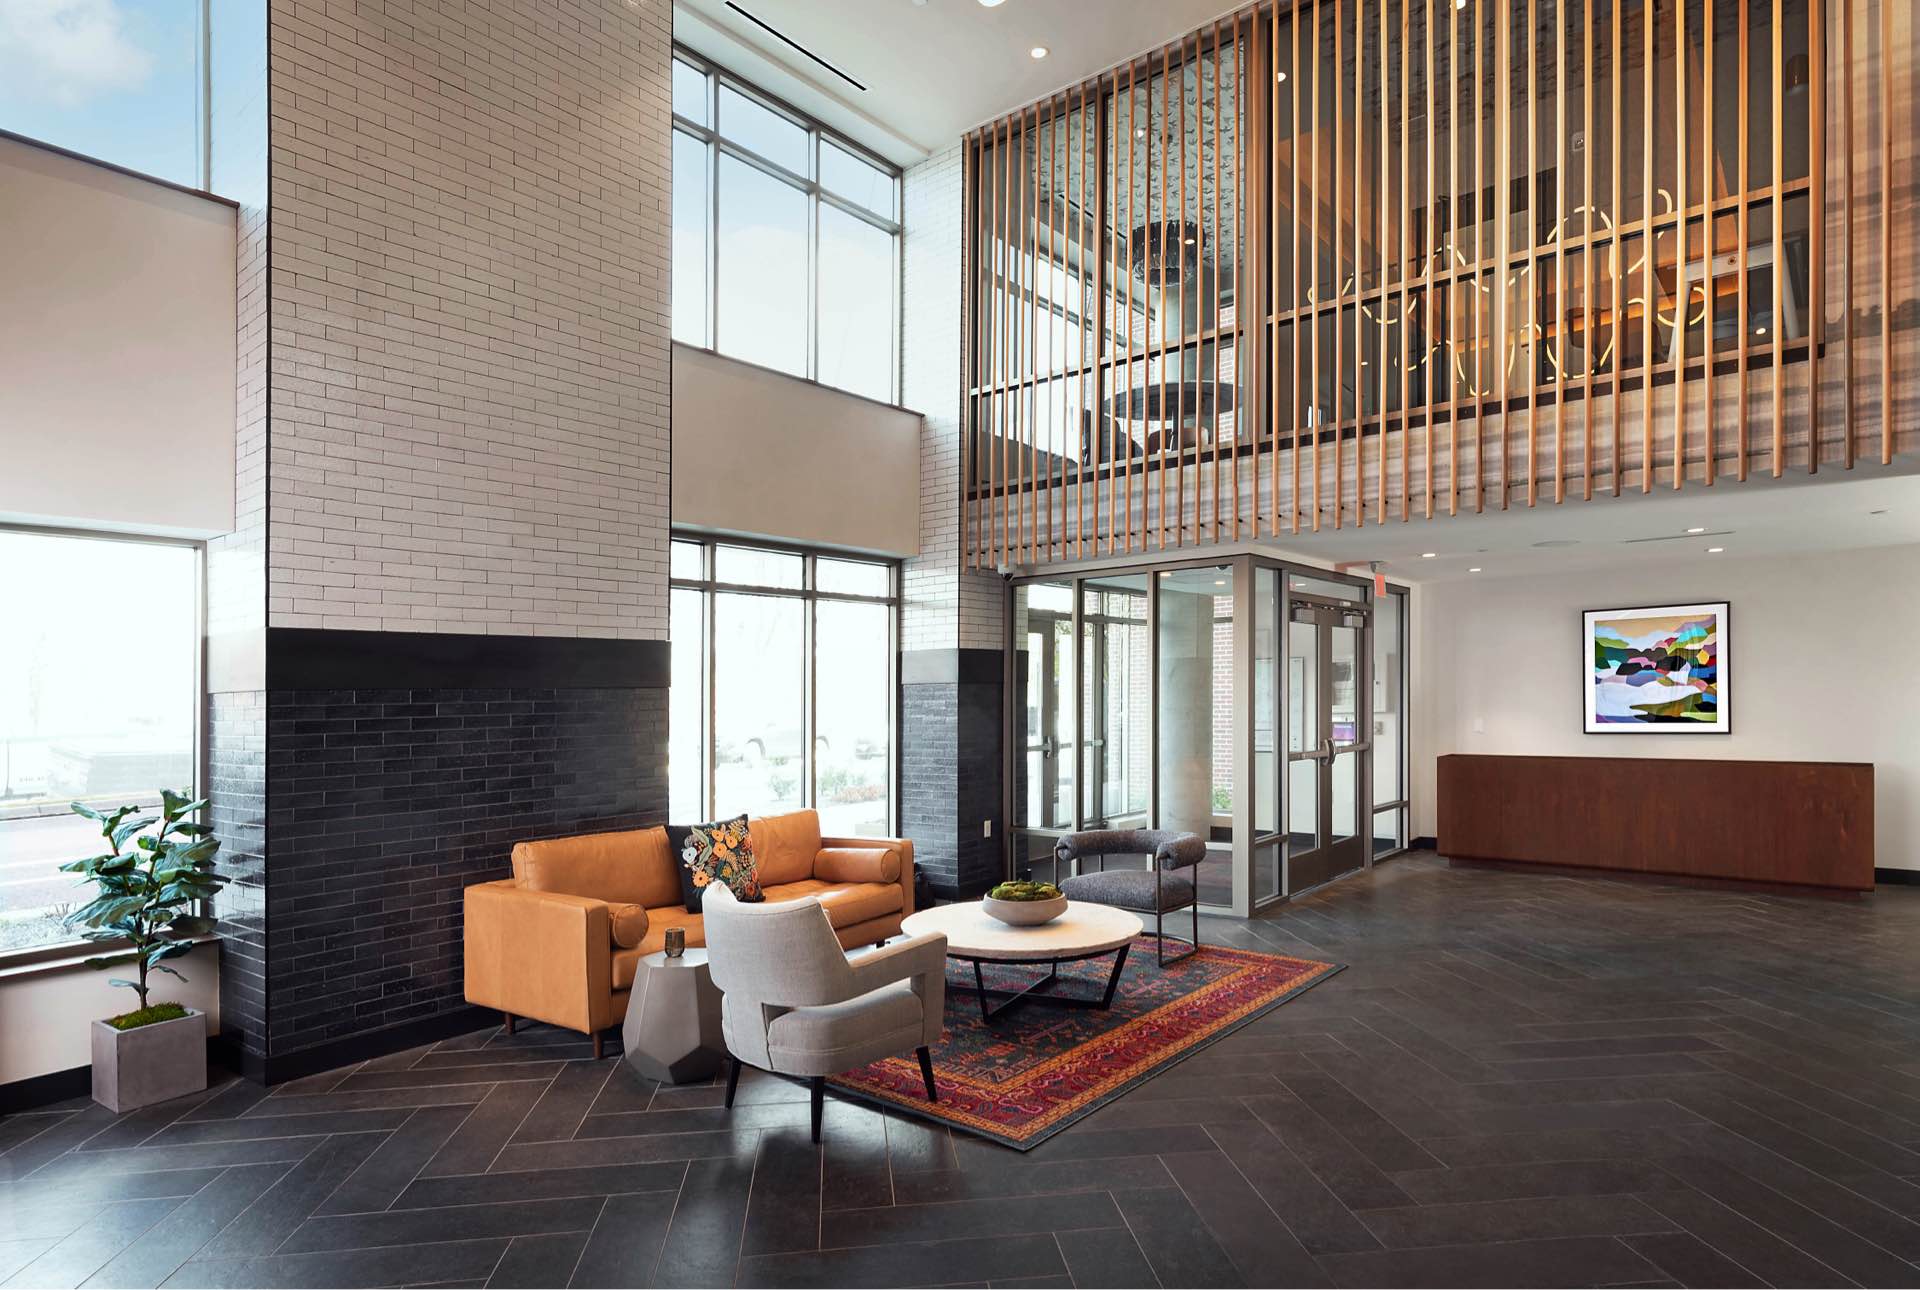 Faraday Park East amenities include a sophisticated lobby entrance with designer fixtures